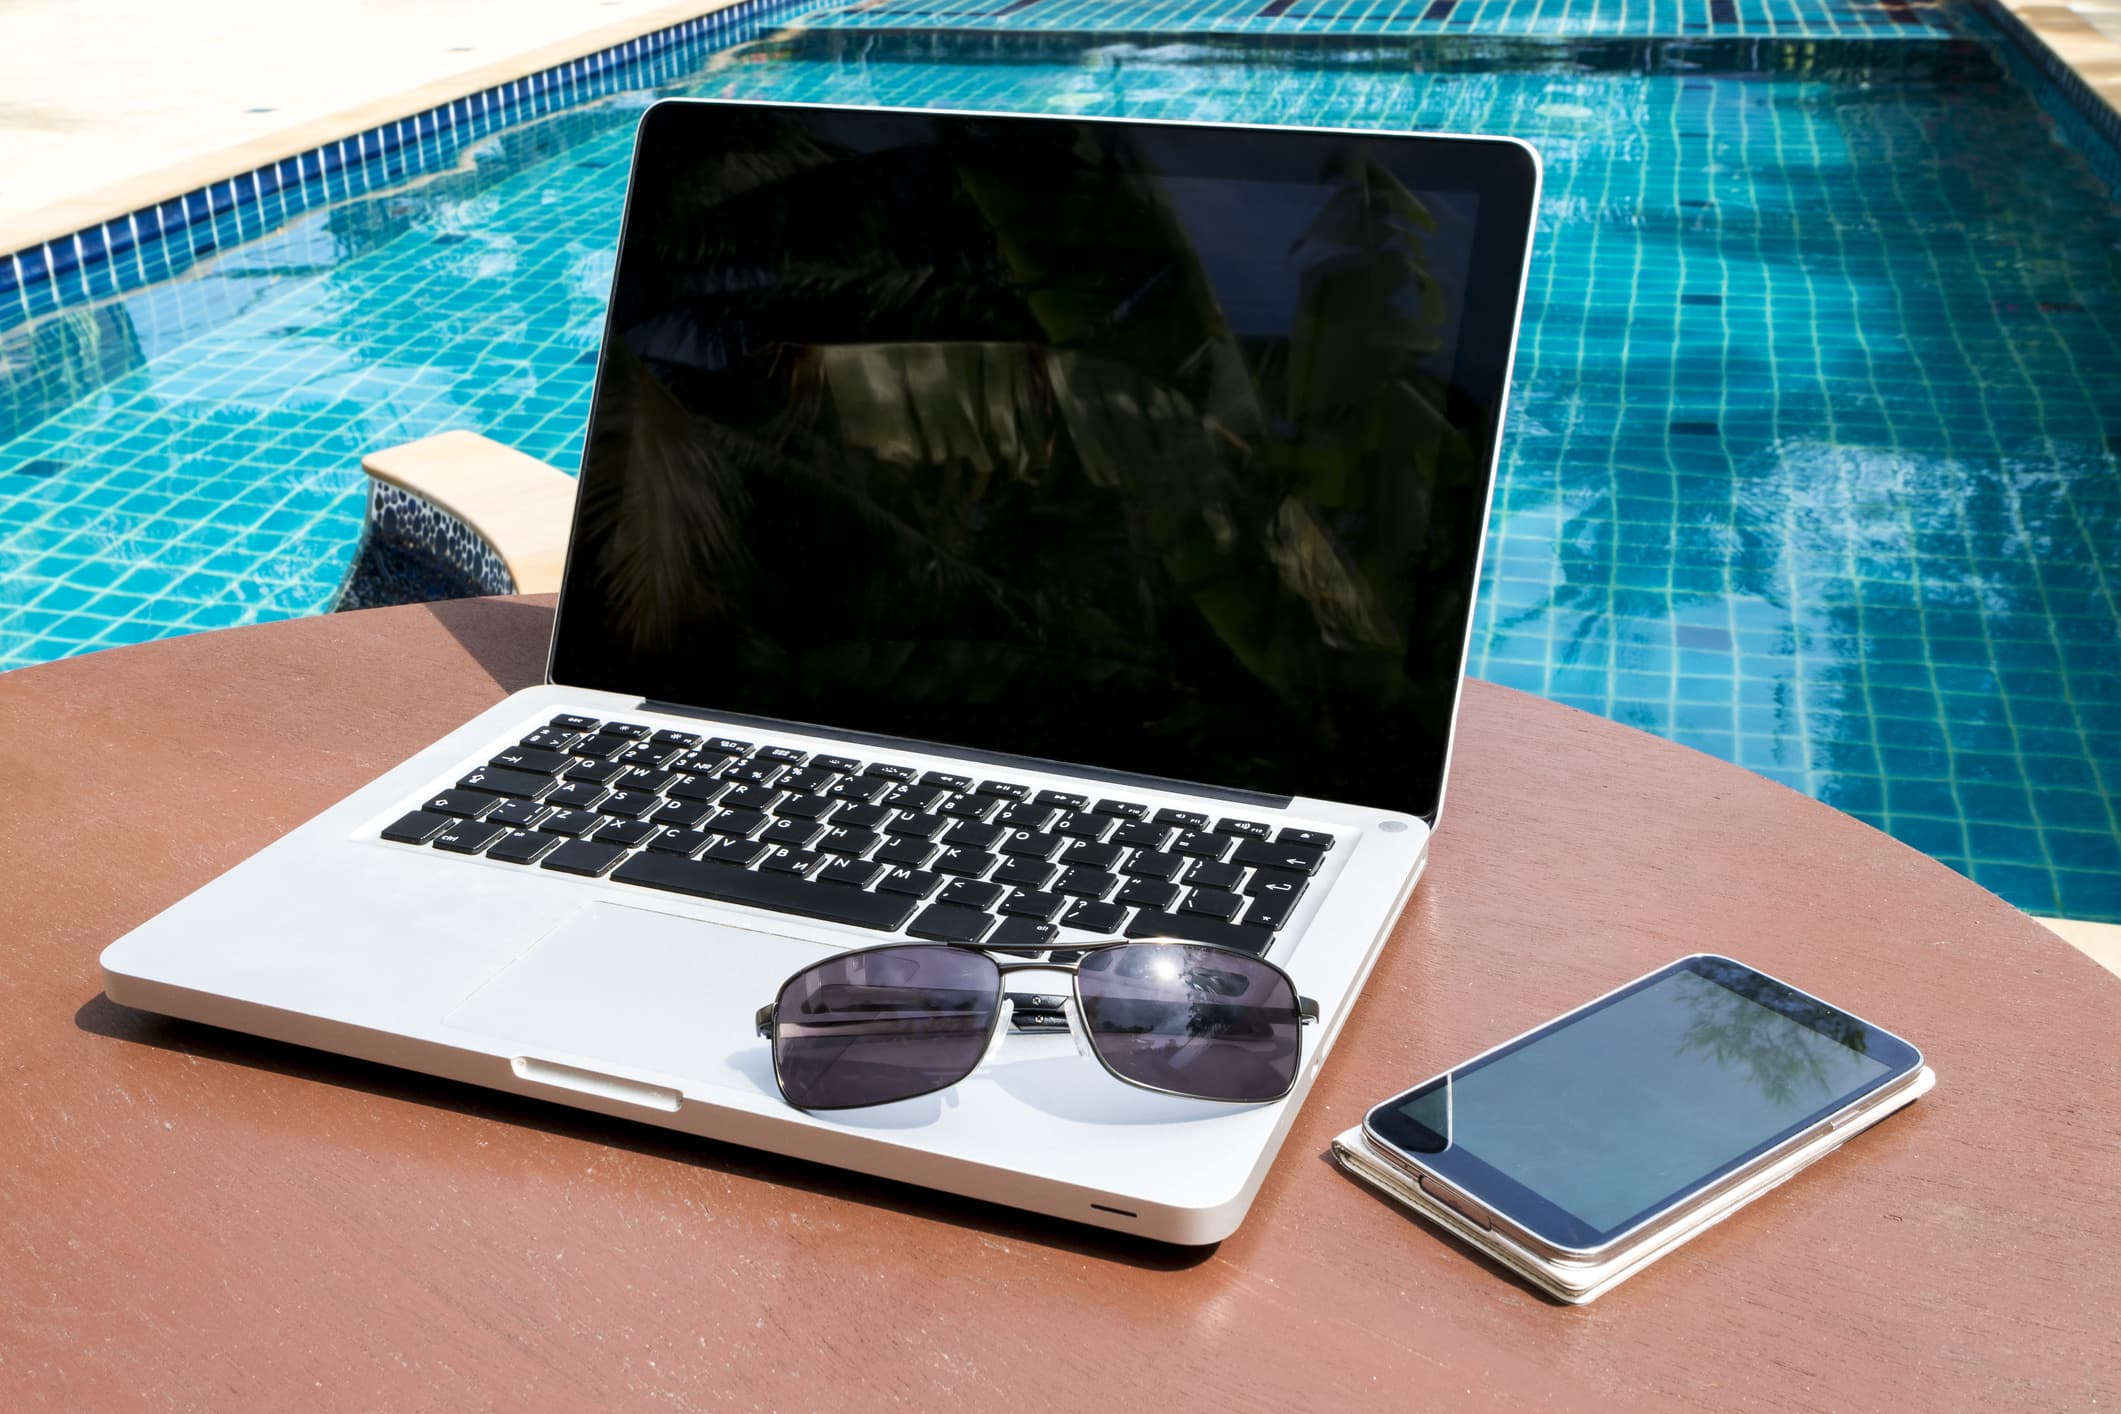 A view of a swimming pool with a laptop, smartphone, and sunglasses in the foreground.